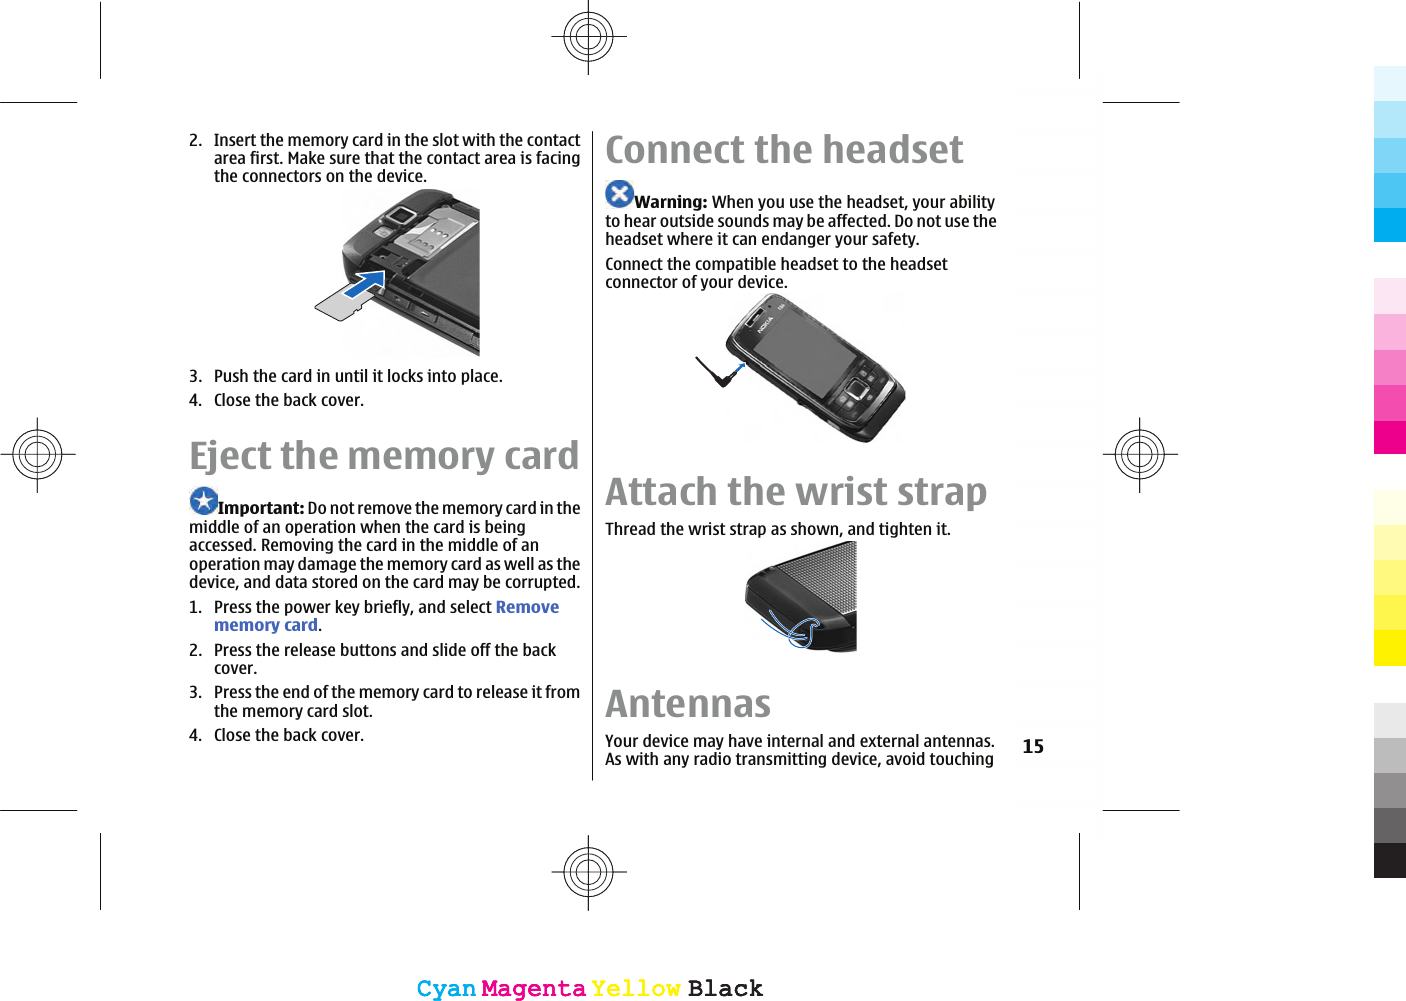 2. Insert the memory card in the slot with the contactarea first. Make sure that the contact area is facingthe connectors on the device.3. Push the card in until it locks into place.4. Close the back cover.Eject the memory cardImportant: Do not remove the memory card in themiddle of an operation when the card is beingaccessed. Removing the card in the middle of anoperation may damage the memory card as well as thedevice, and data stored on the card may be corrupted.1. Press the power key briefly, and select Removememory card.2. Press the release buttons and slide off the backcover.3. Press the end of the memory card to release it fromthe memory card slot.4. Close the back cover.Connect the headsetWarning: When you use the headset, your abilityto hear outside sounds may be affected. Do not use theheadset where it can endanger your safety.Connect the compatible headset to the headsetconnector of your device.Attach the wrist strapThread the wrist strap as shown, and tighten it.AntennasYour device may have internal and external antennas.As with any radio transmitting device, avoid touching 15CyanCyanMagentaMagentaYellowYellowBlackBlackCyanCyanMagentaMagentaYellowYellowBlackBlack